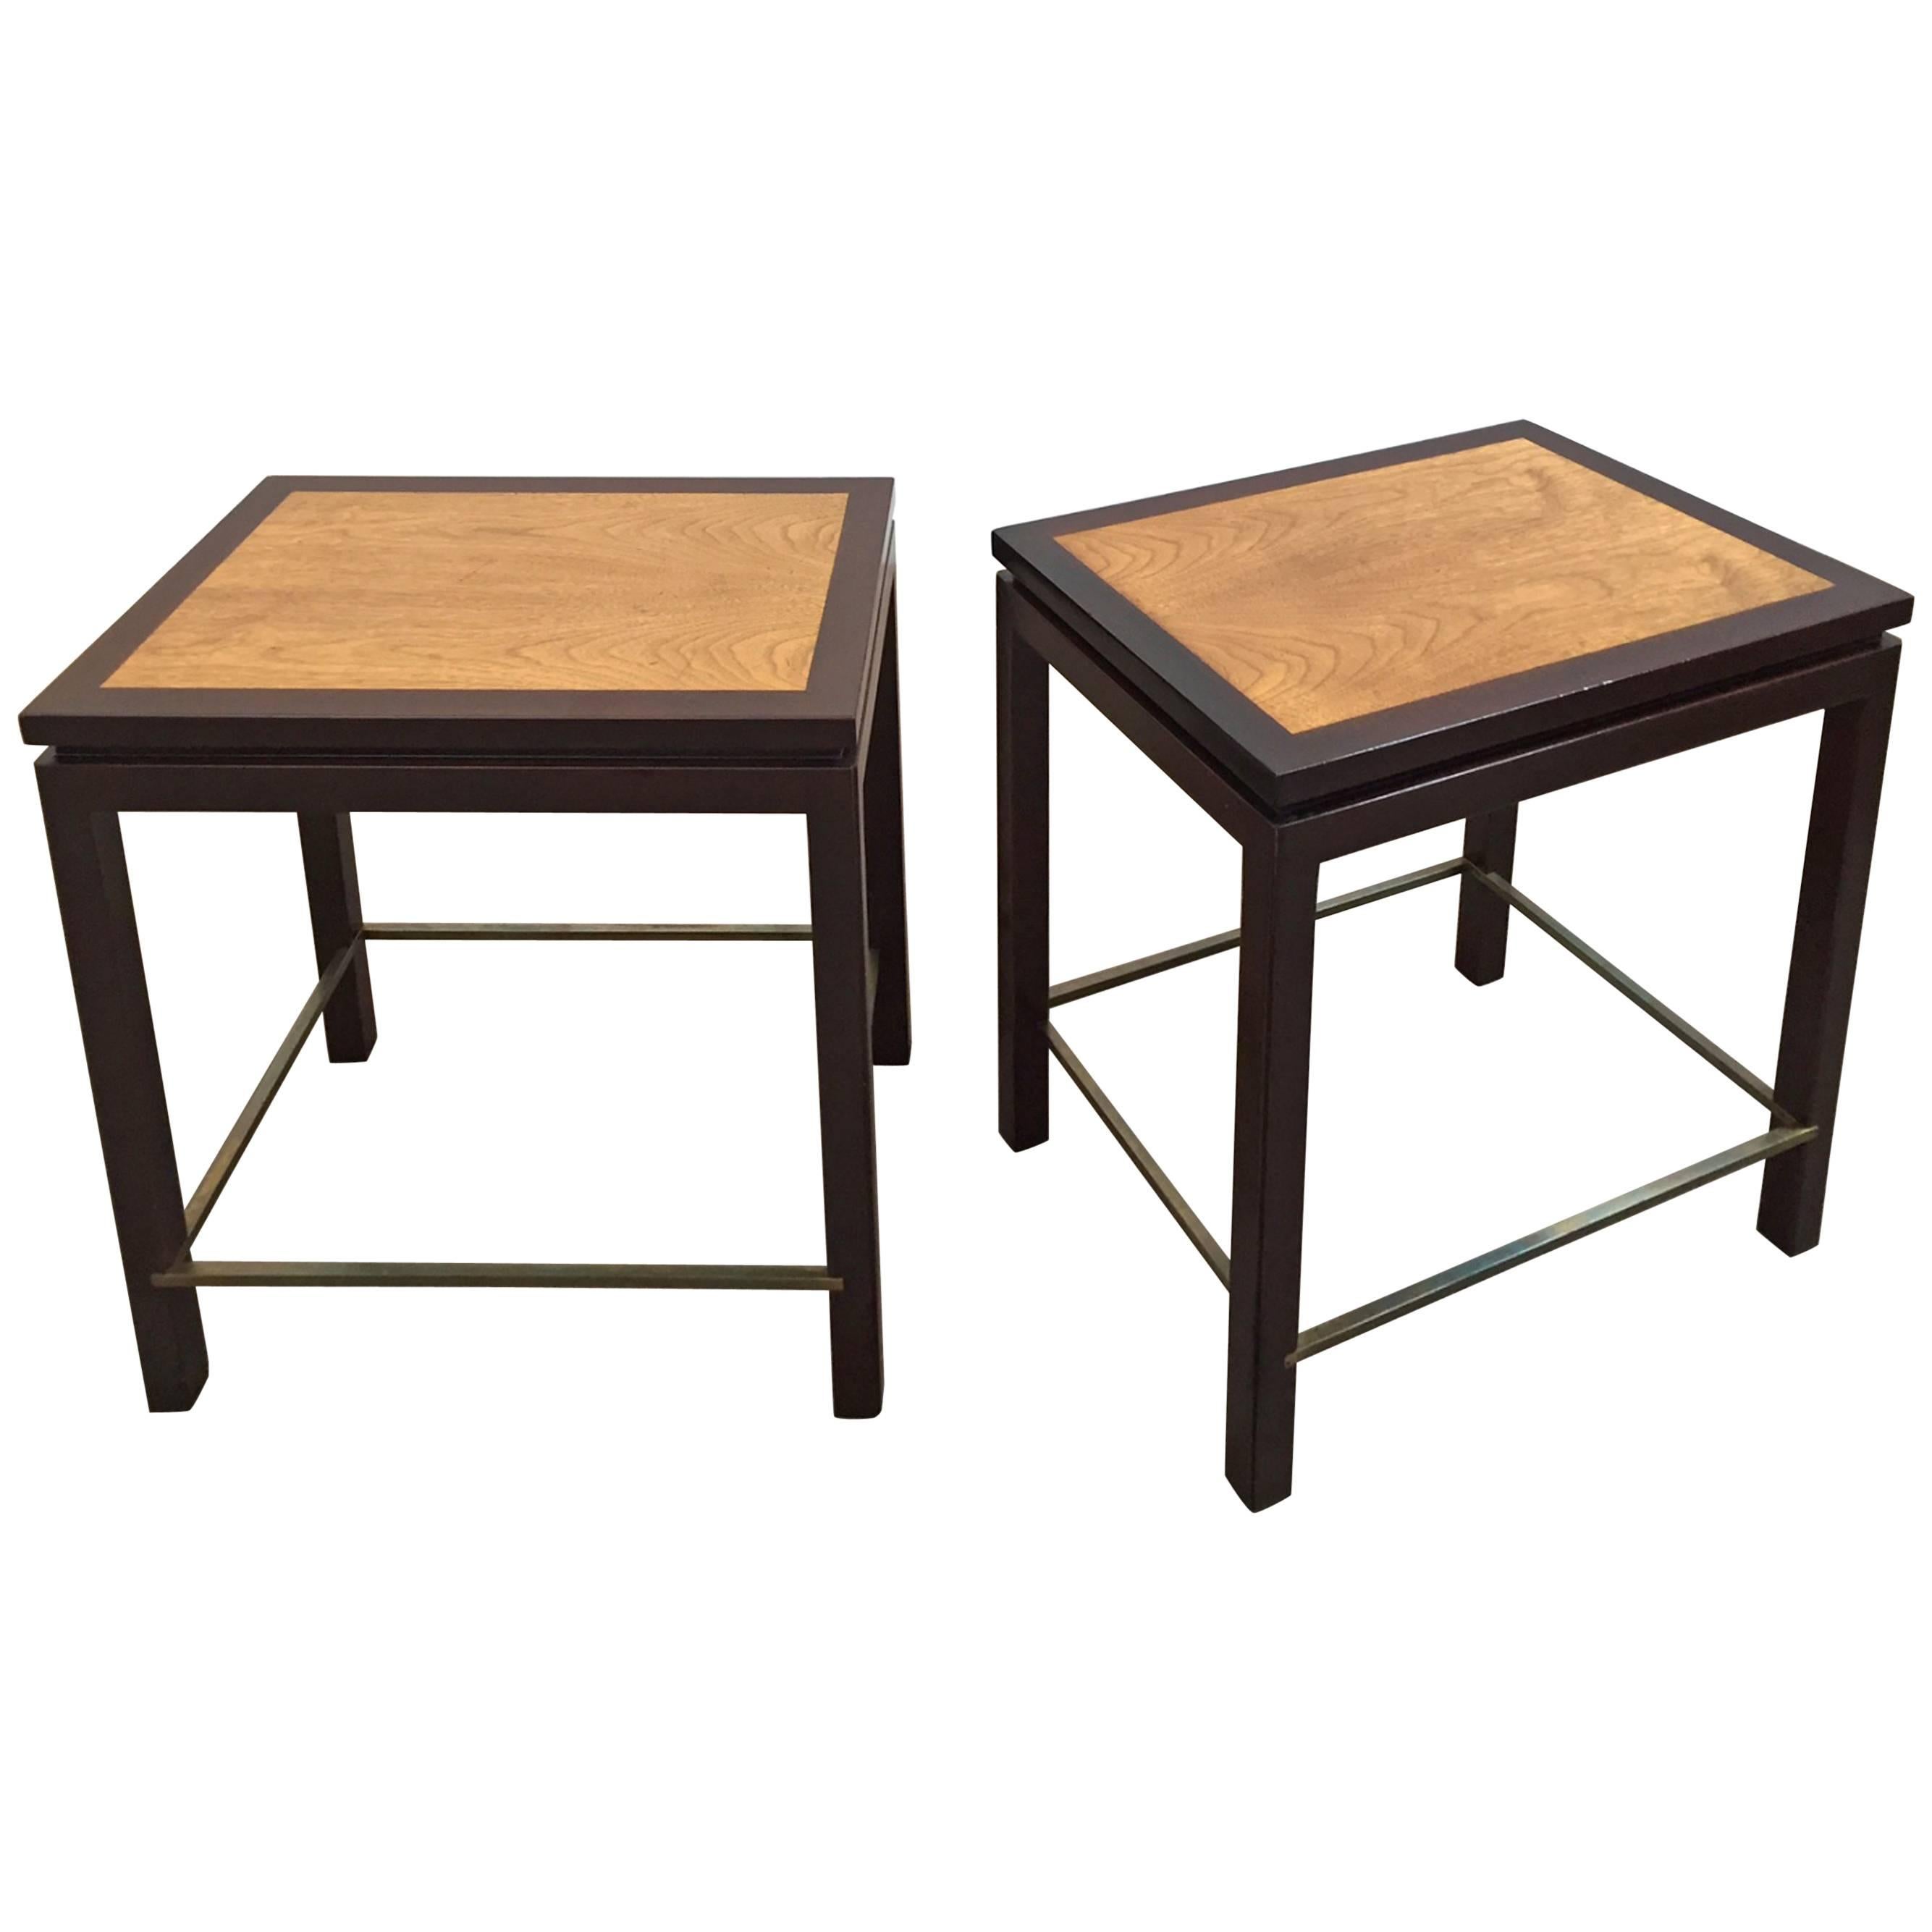 Pair of Tables by Edward Wormley for Dunbar Furniture